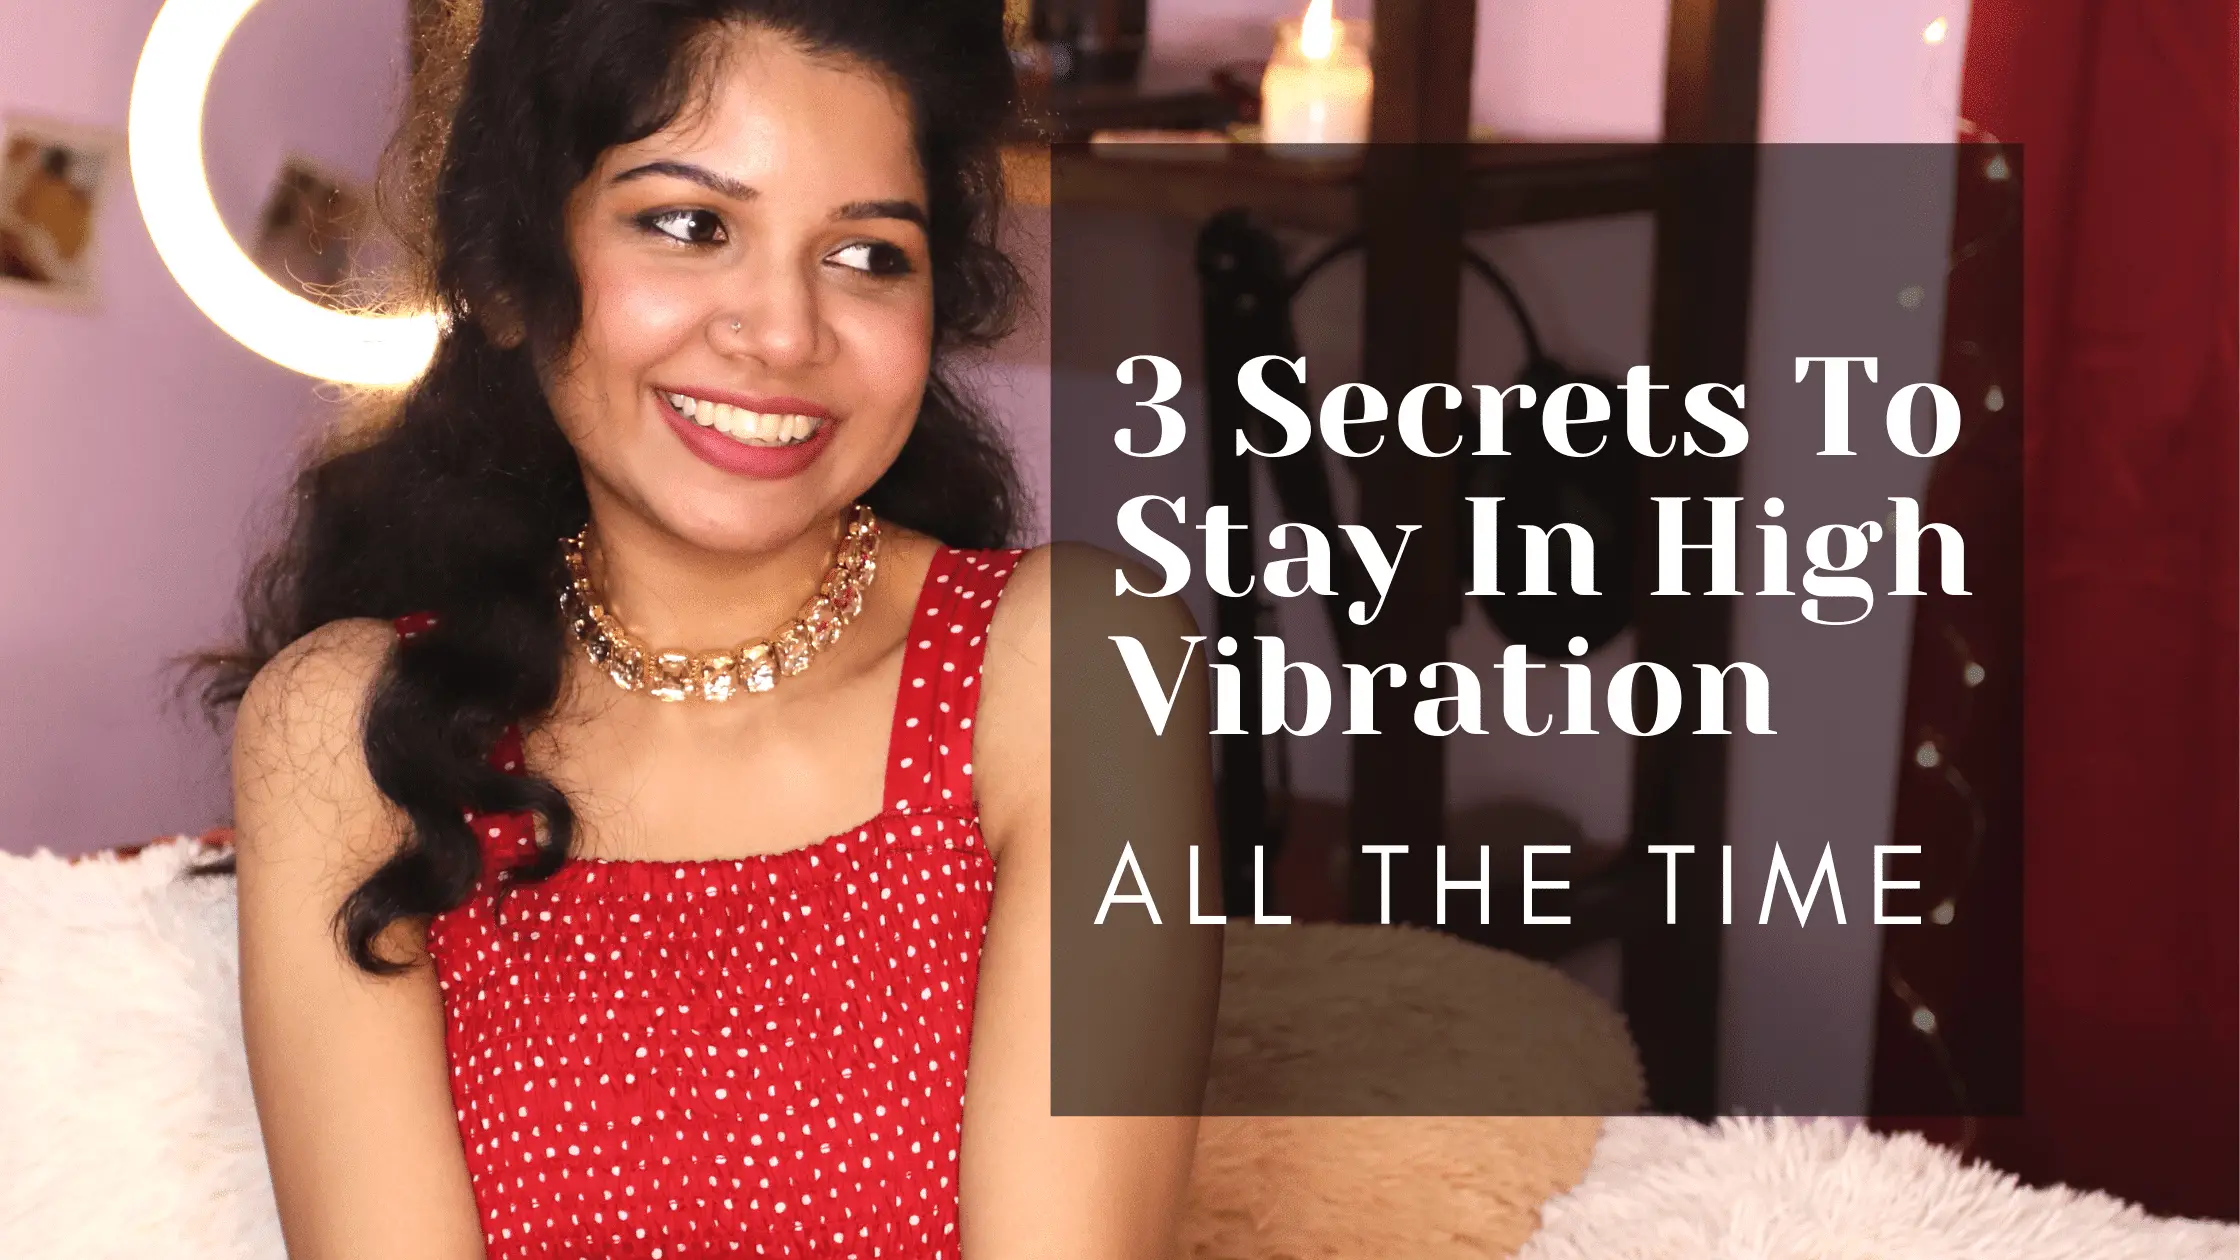 3 Secrets For Staying High Vibration All The Time